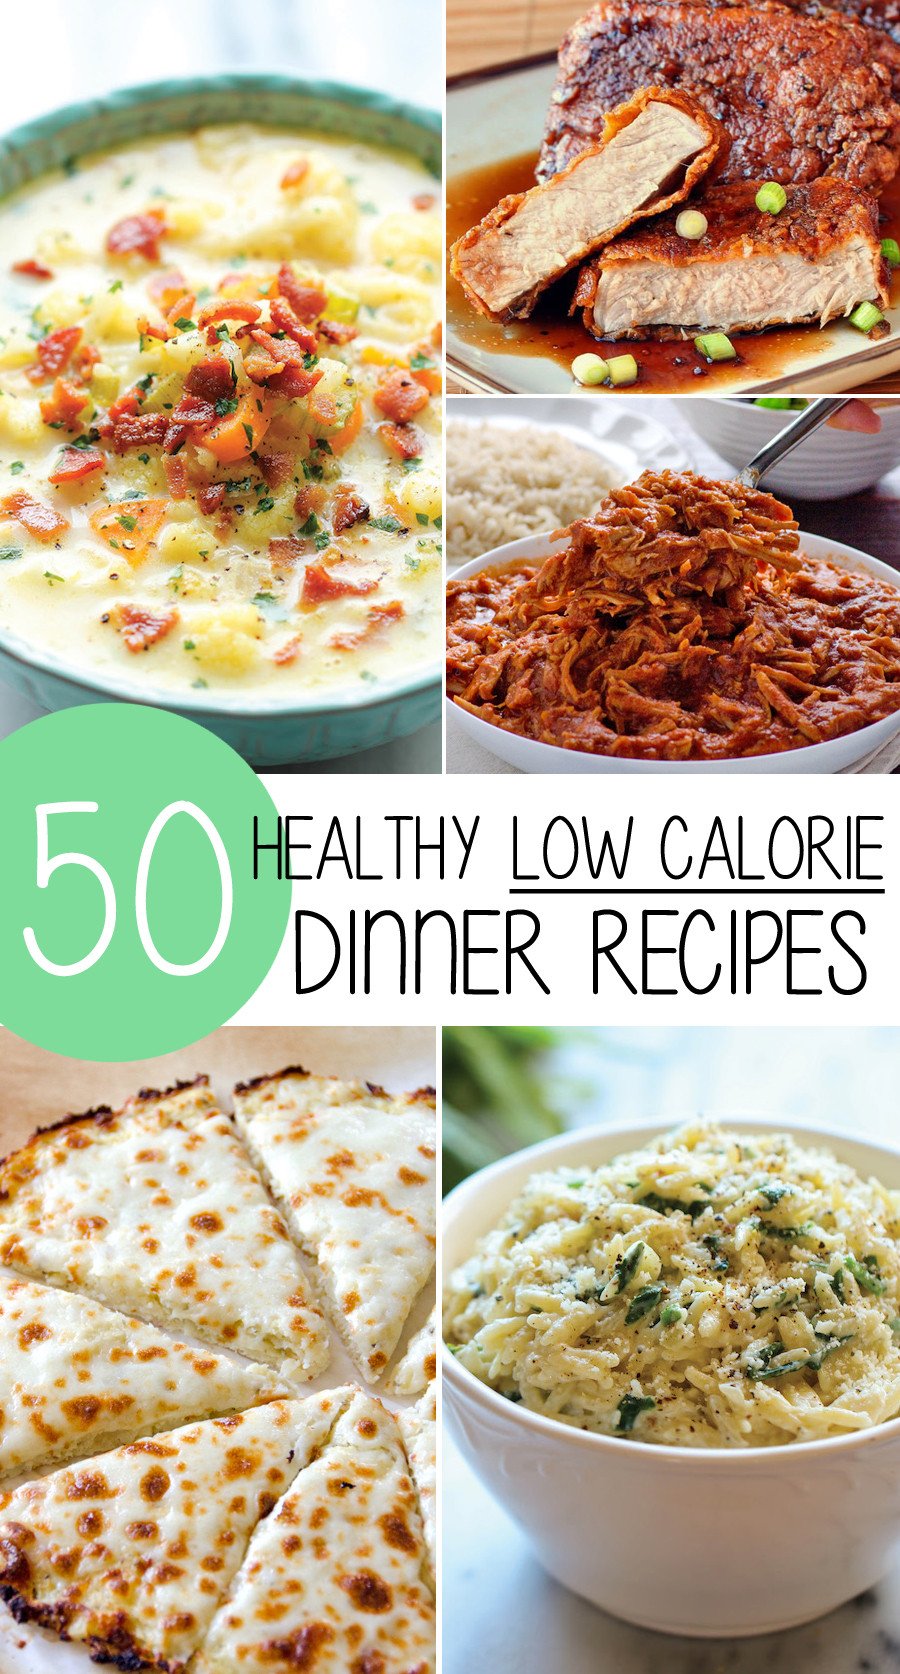 Low Calorie Dinner Inspirational 50 Healthy Low Calorie Weight Loss Dinner Recipes